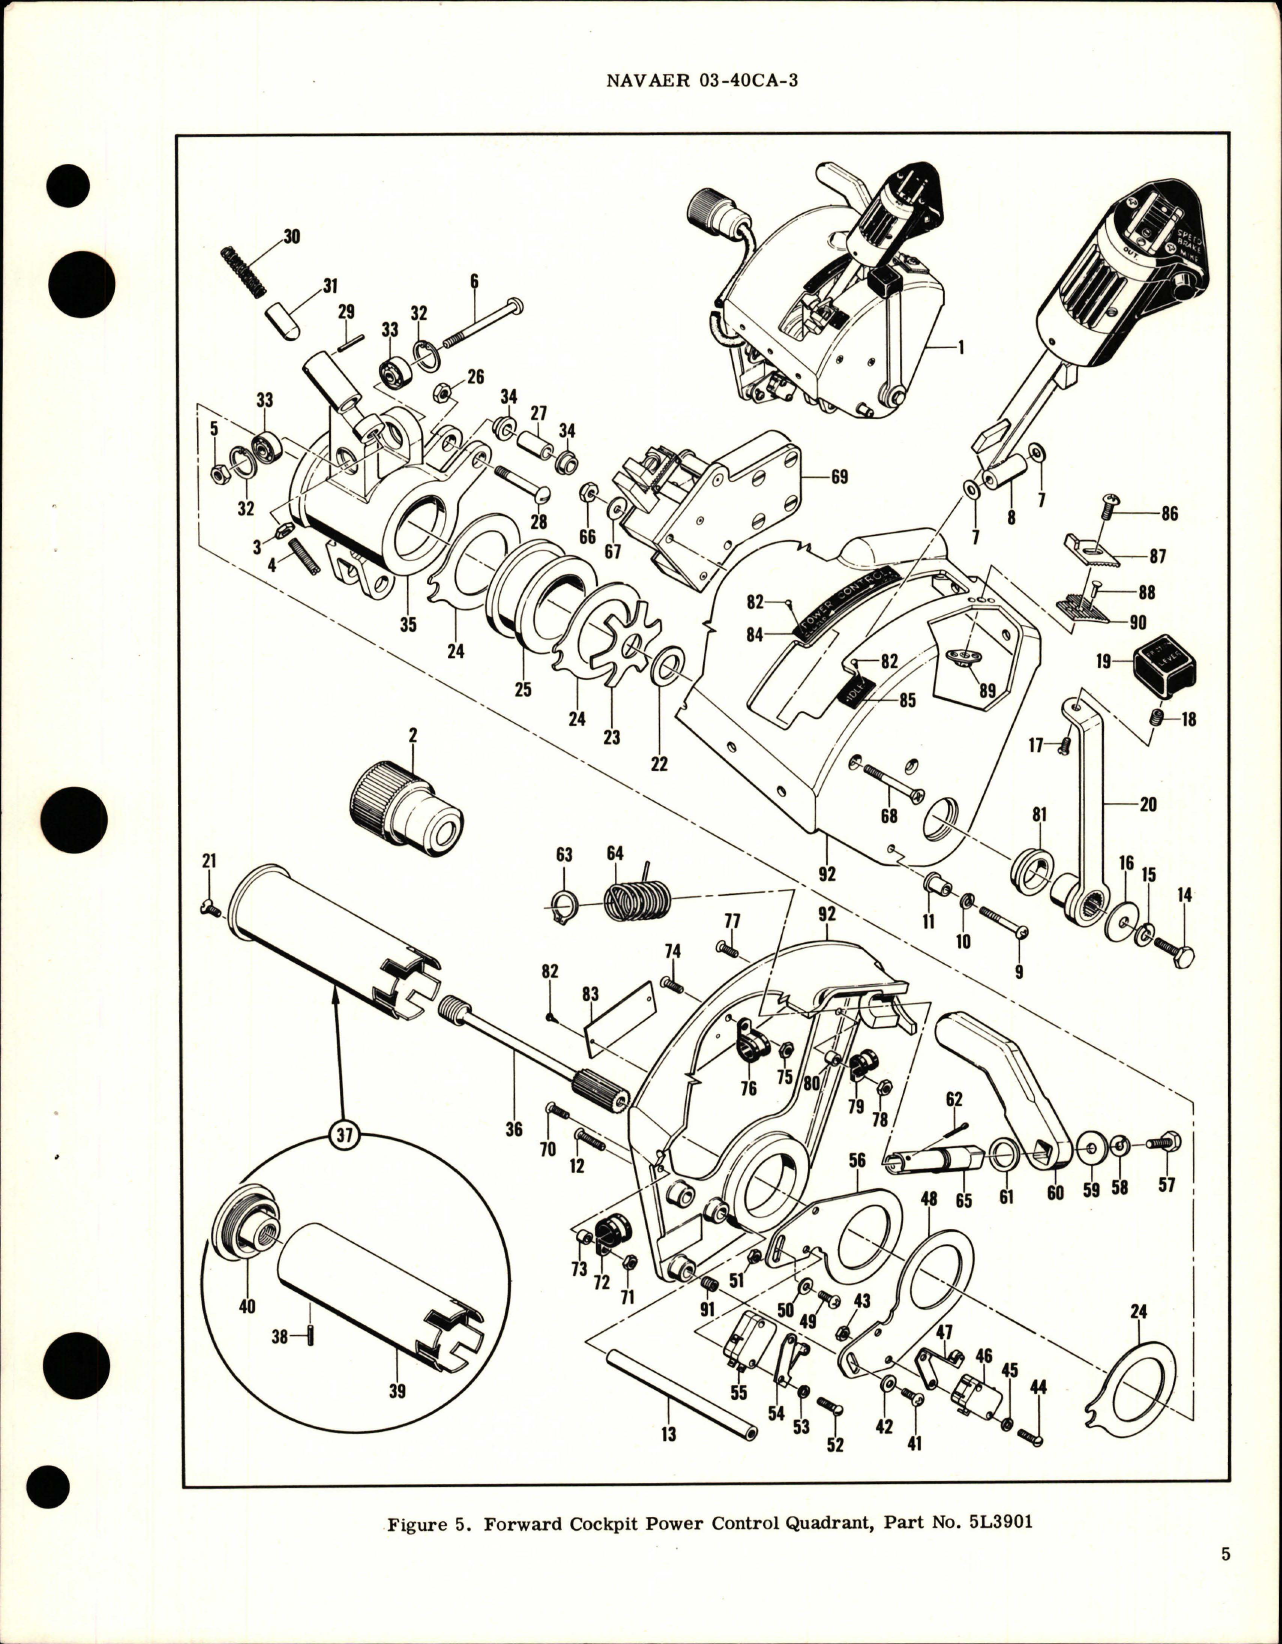 Sample page 5 from AirCorps Library document: Overhaul Instructions with Parts Breakdown for Cockpit Power Control Quadrant - Parts 5L3901 and 5L3902